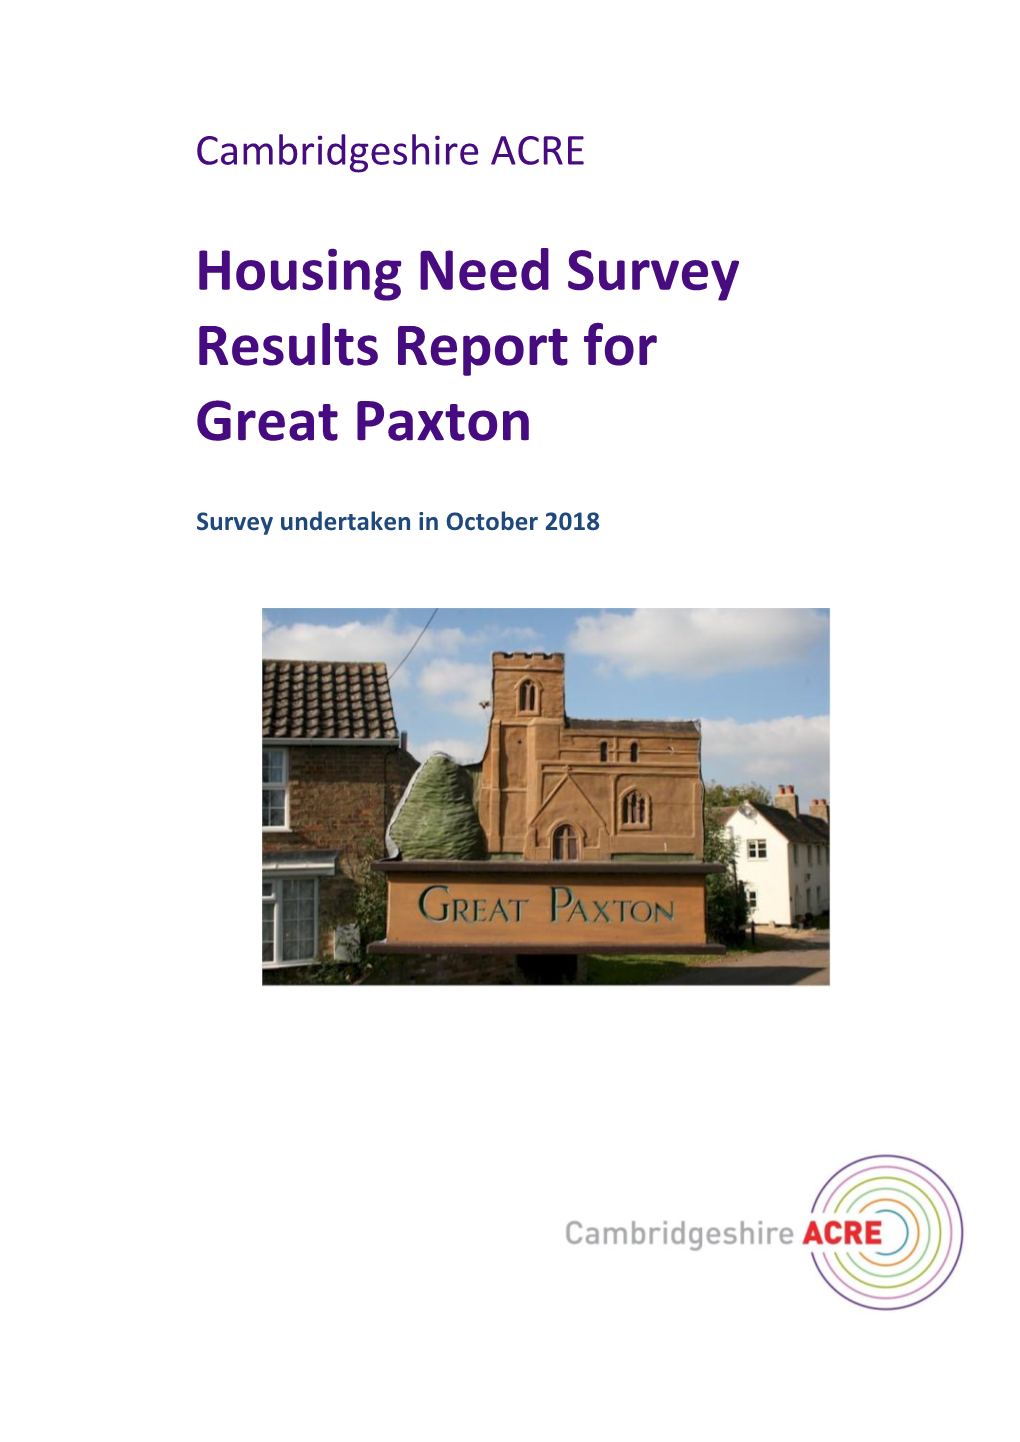 Housing Need Survey Results Report for Great Paxton